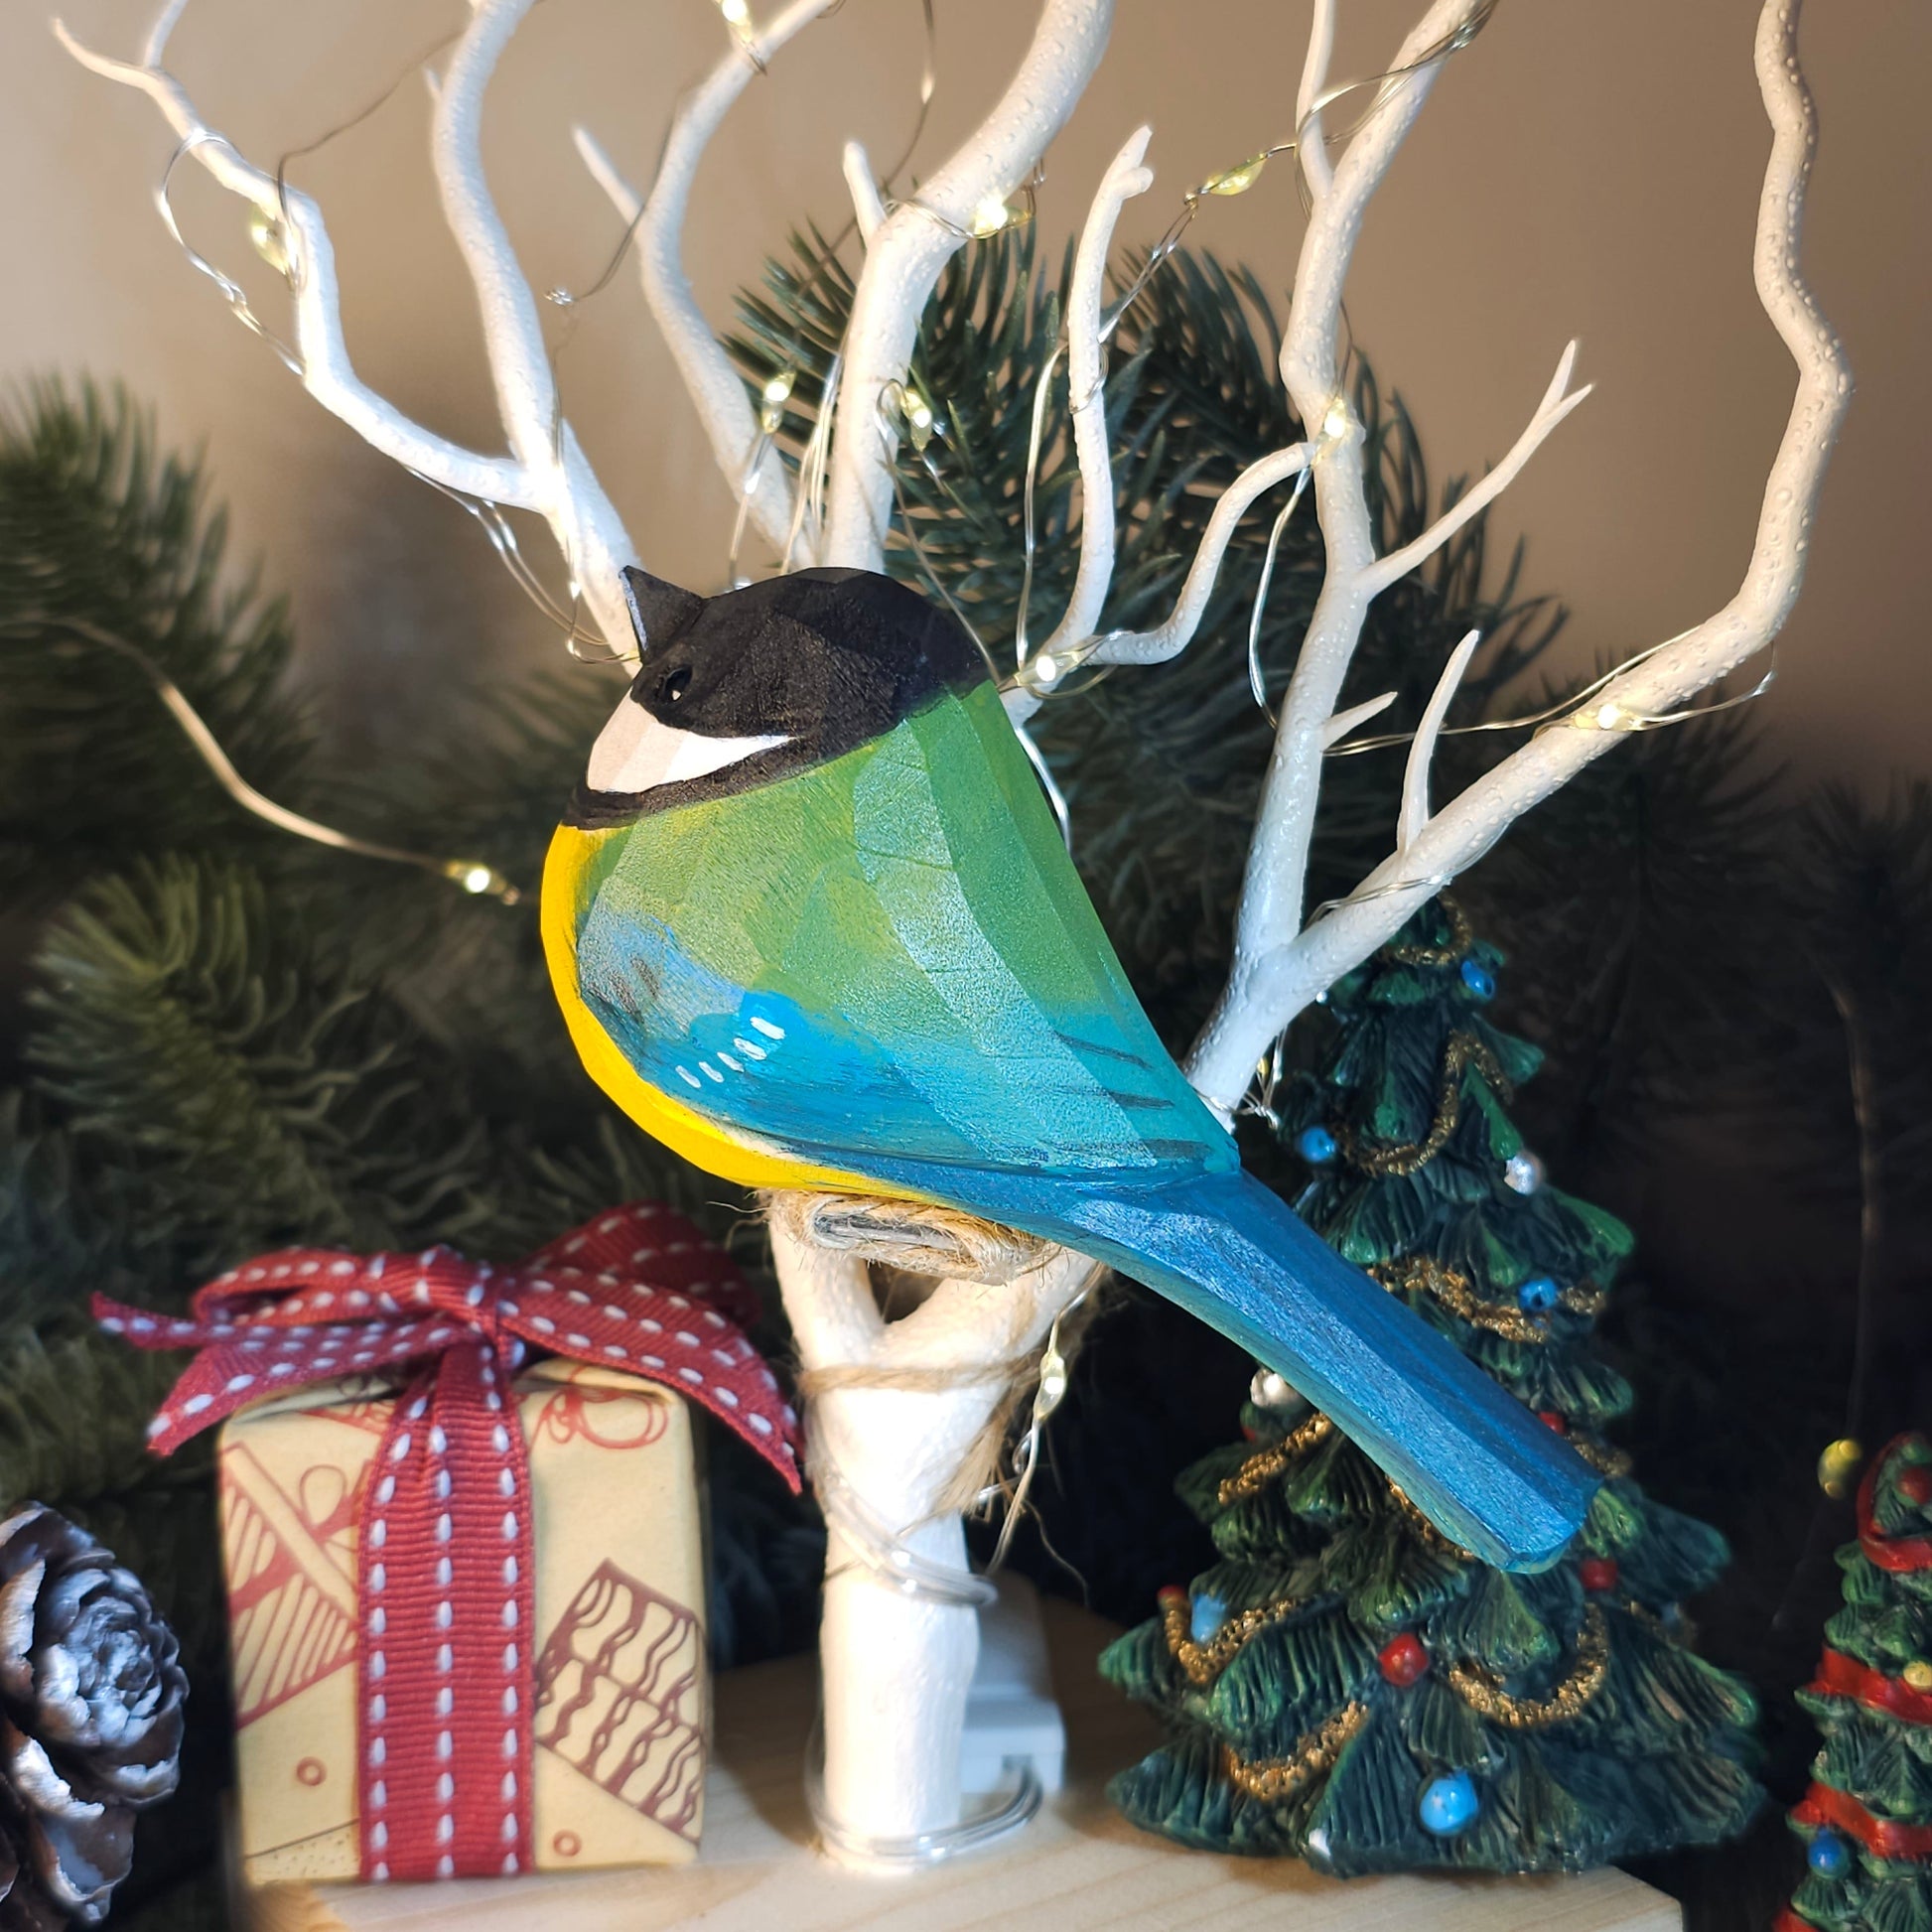 Artisan-Crafted Hand-Painted Wooden Great Tit Figurine - A Perfect Blend of Nature and Craftsmanship - PAINTED BIRD SHOP